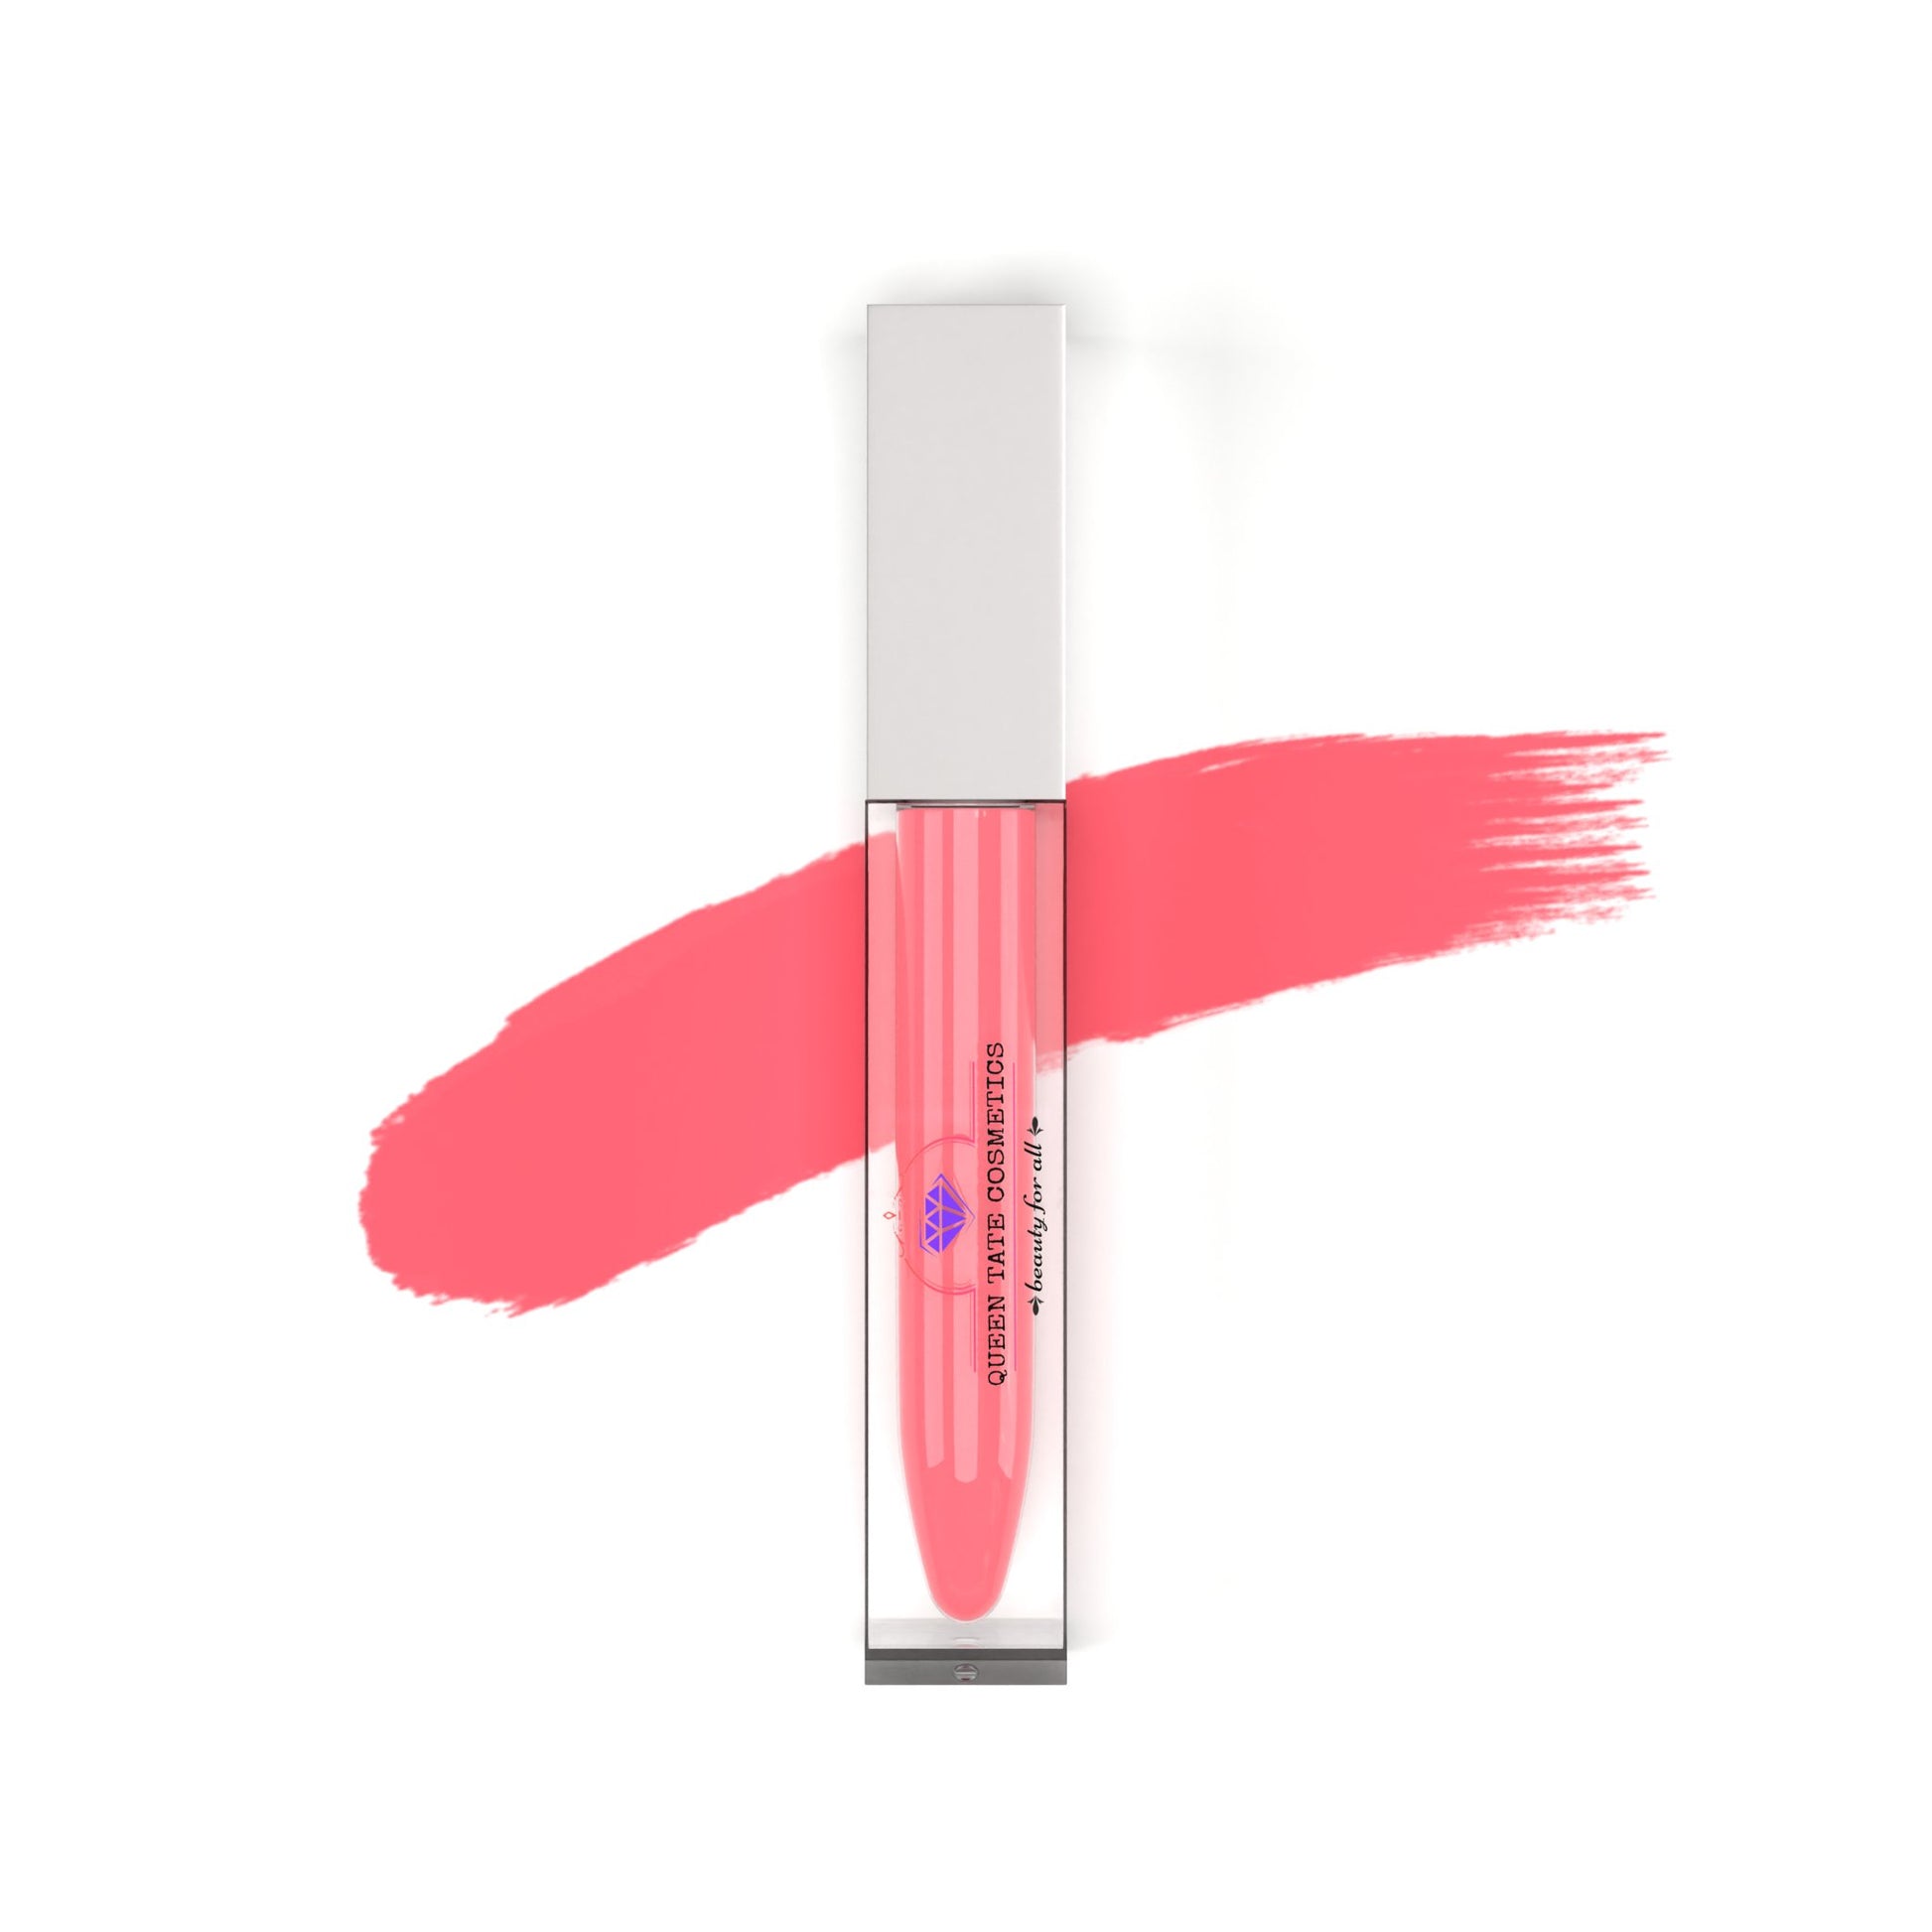 Non-Sticky Lip Gloss Pink Petals- "Lick me" - Queen Tate CosmeticsNon-Sticky Lip GlossNon-Sticky Lip Gloss Pink Petals- "Lick me"Non-Sticky Lip GlossQueen Tate Cosmetics